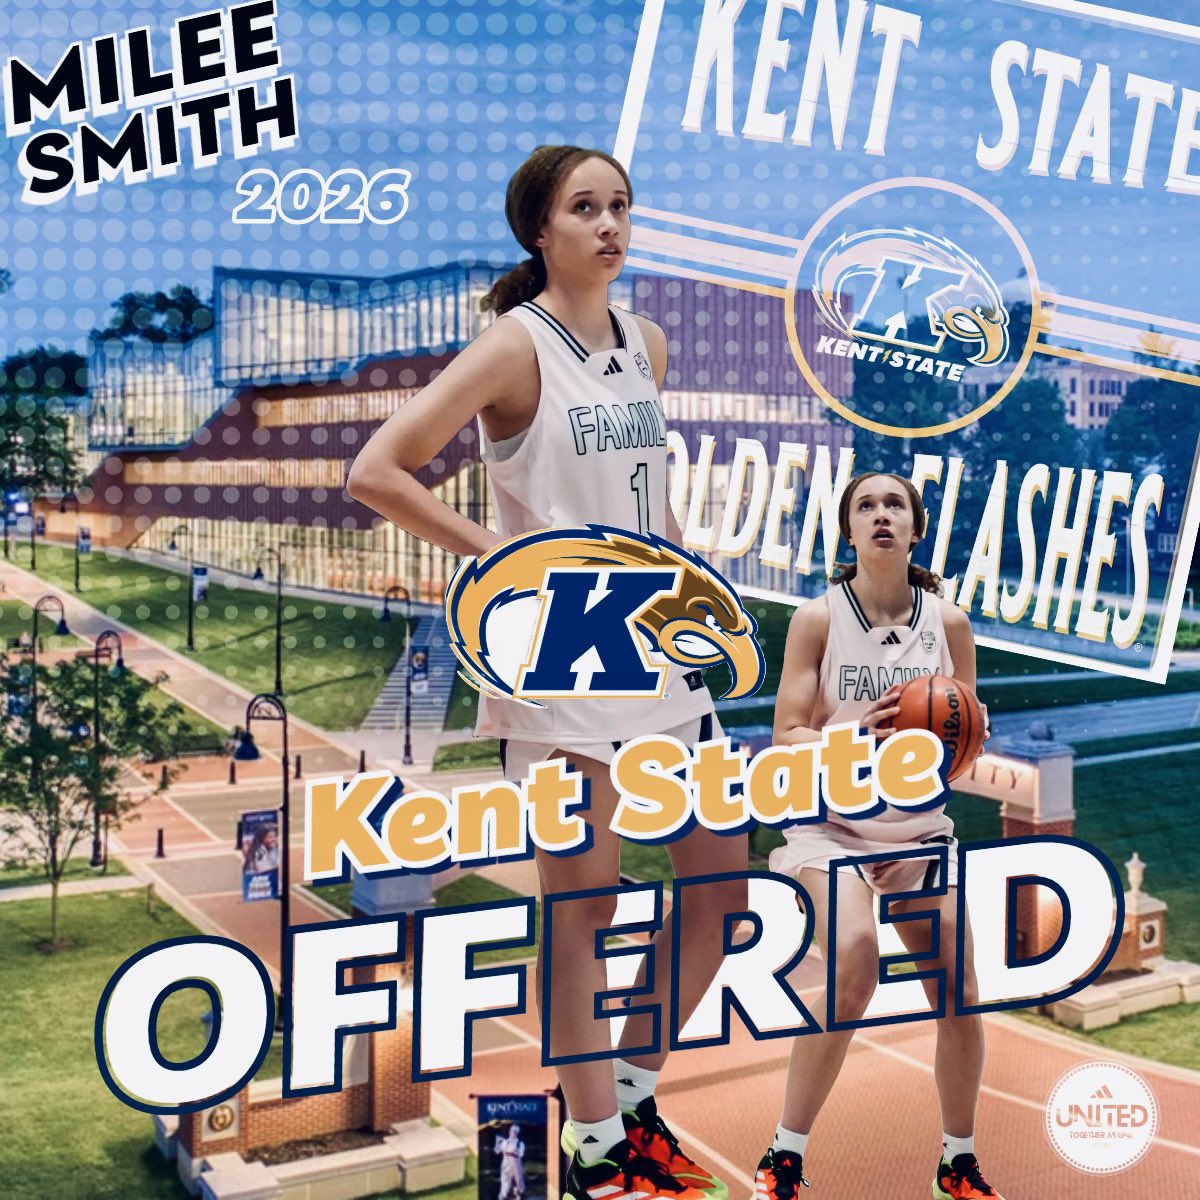 Congrats to our Guard @MileeSmith25 on the offer from @KentStWBB @3SSBGCircuit